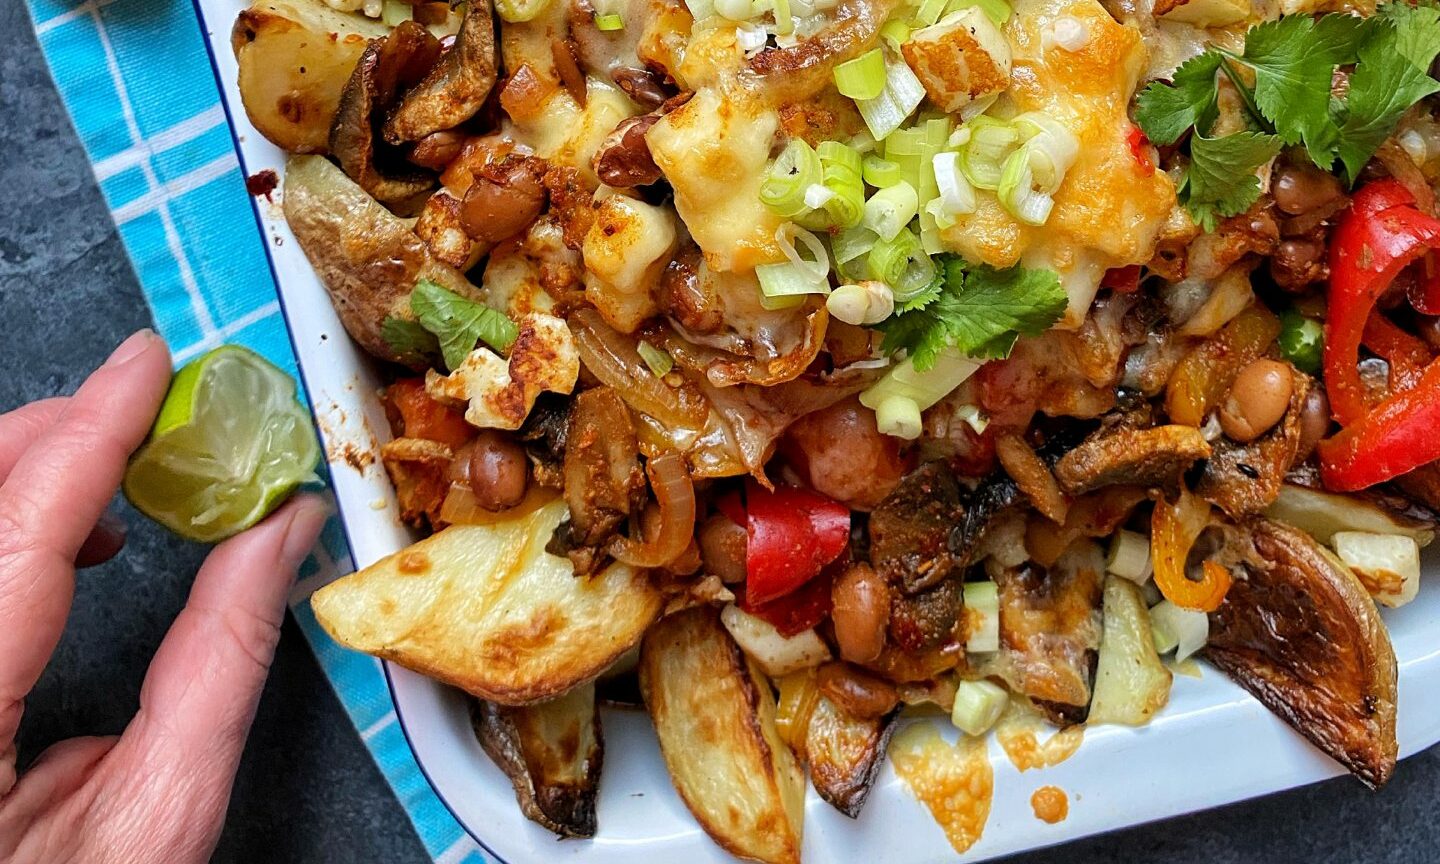 Cook up this easy Mexican-style loaded wedges with halloumi